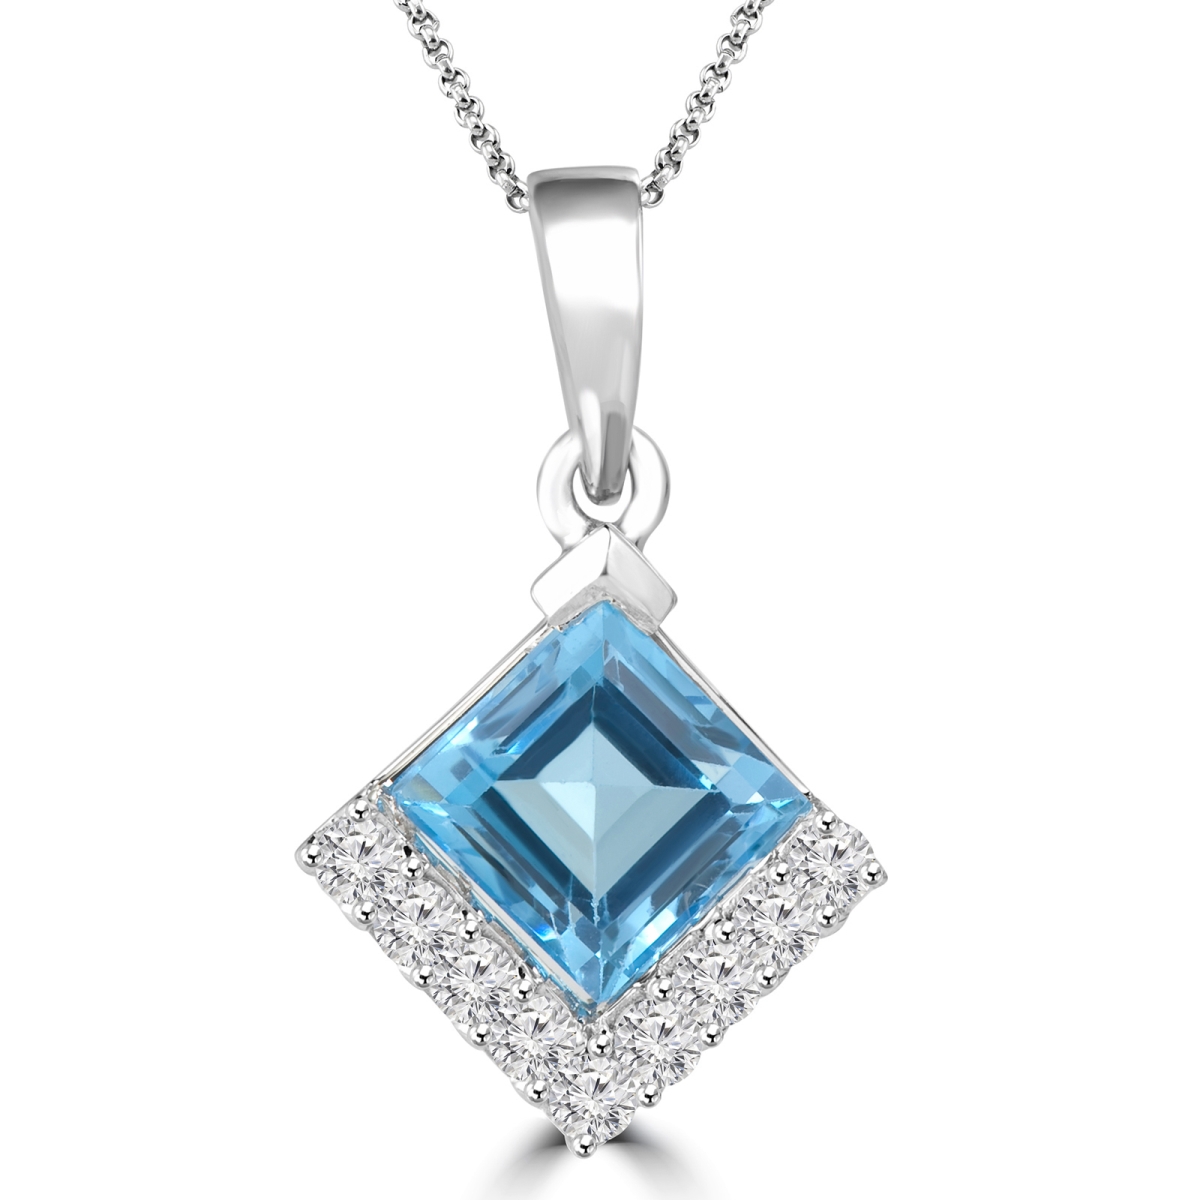 Md170333 2.6 Ctw Emerald Blue Topaz Solitaire With Accents Pendant Necklace In 14k White Gold With Chain, Size